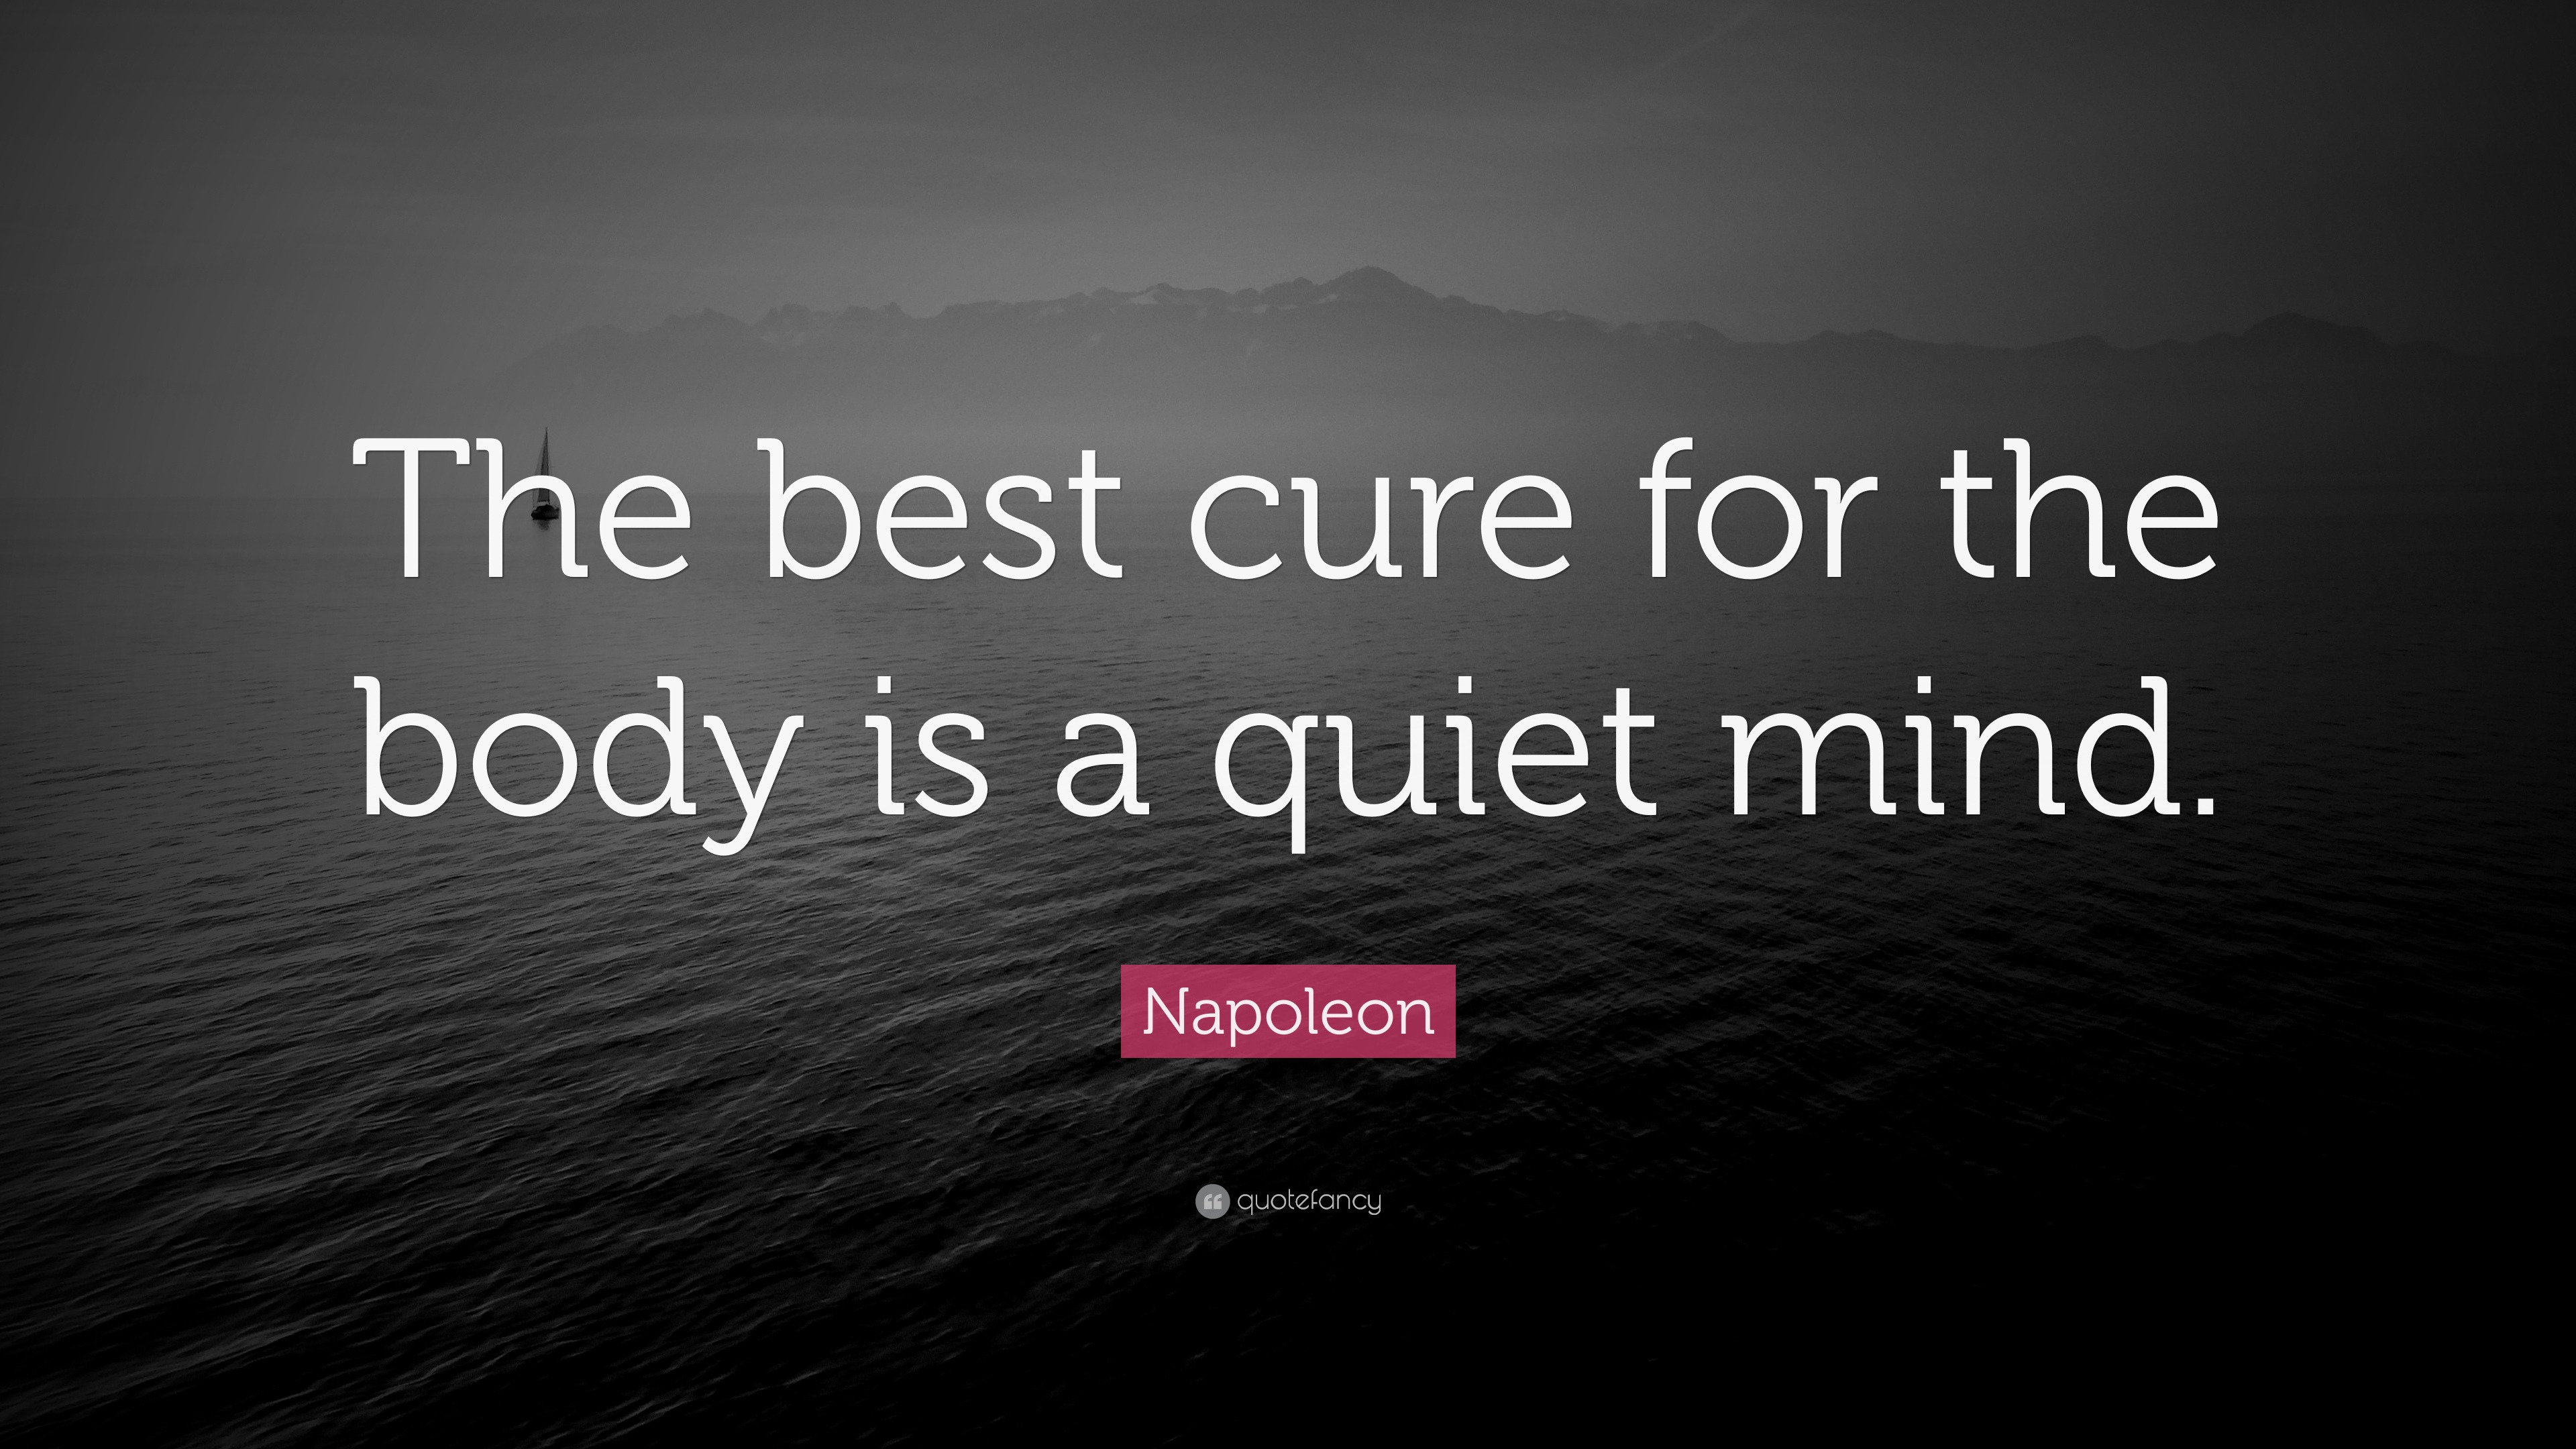 Napoleon Quote: “The best cure for the body is a quiet mind.” (14